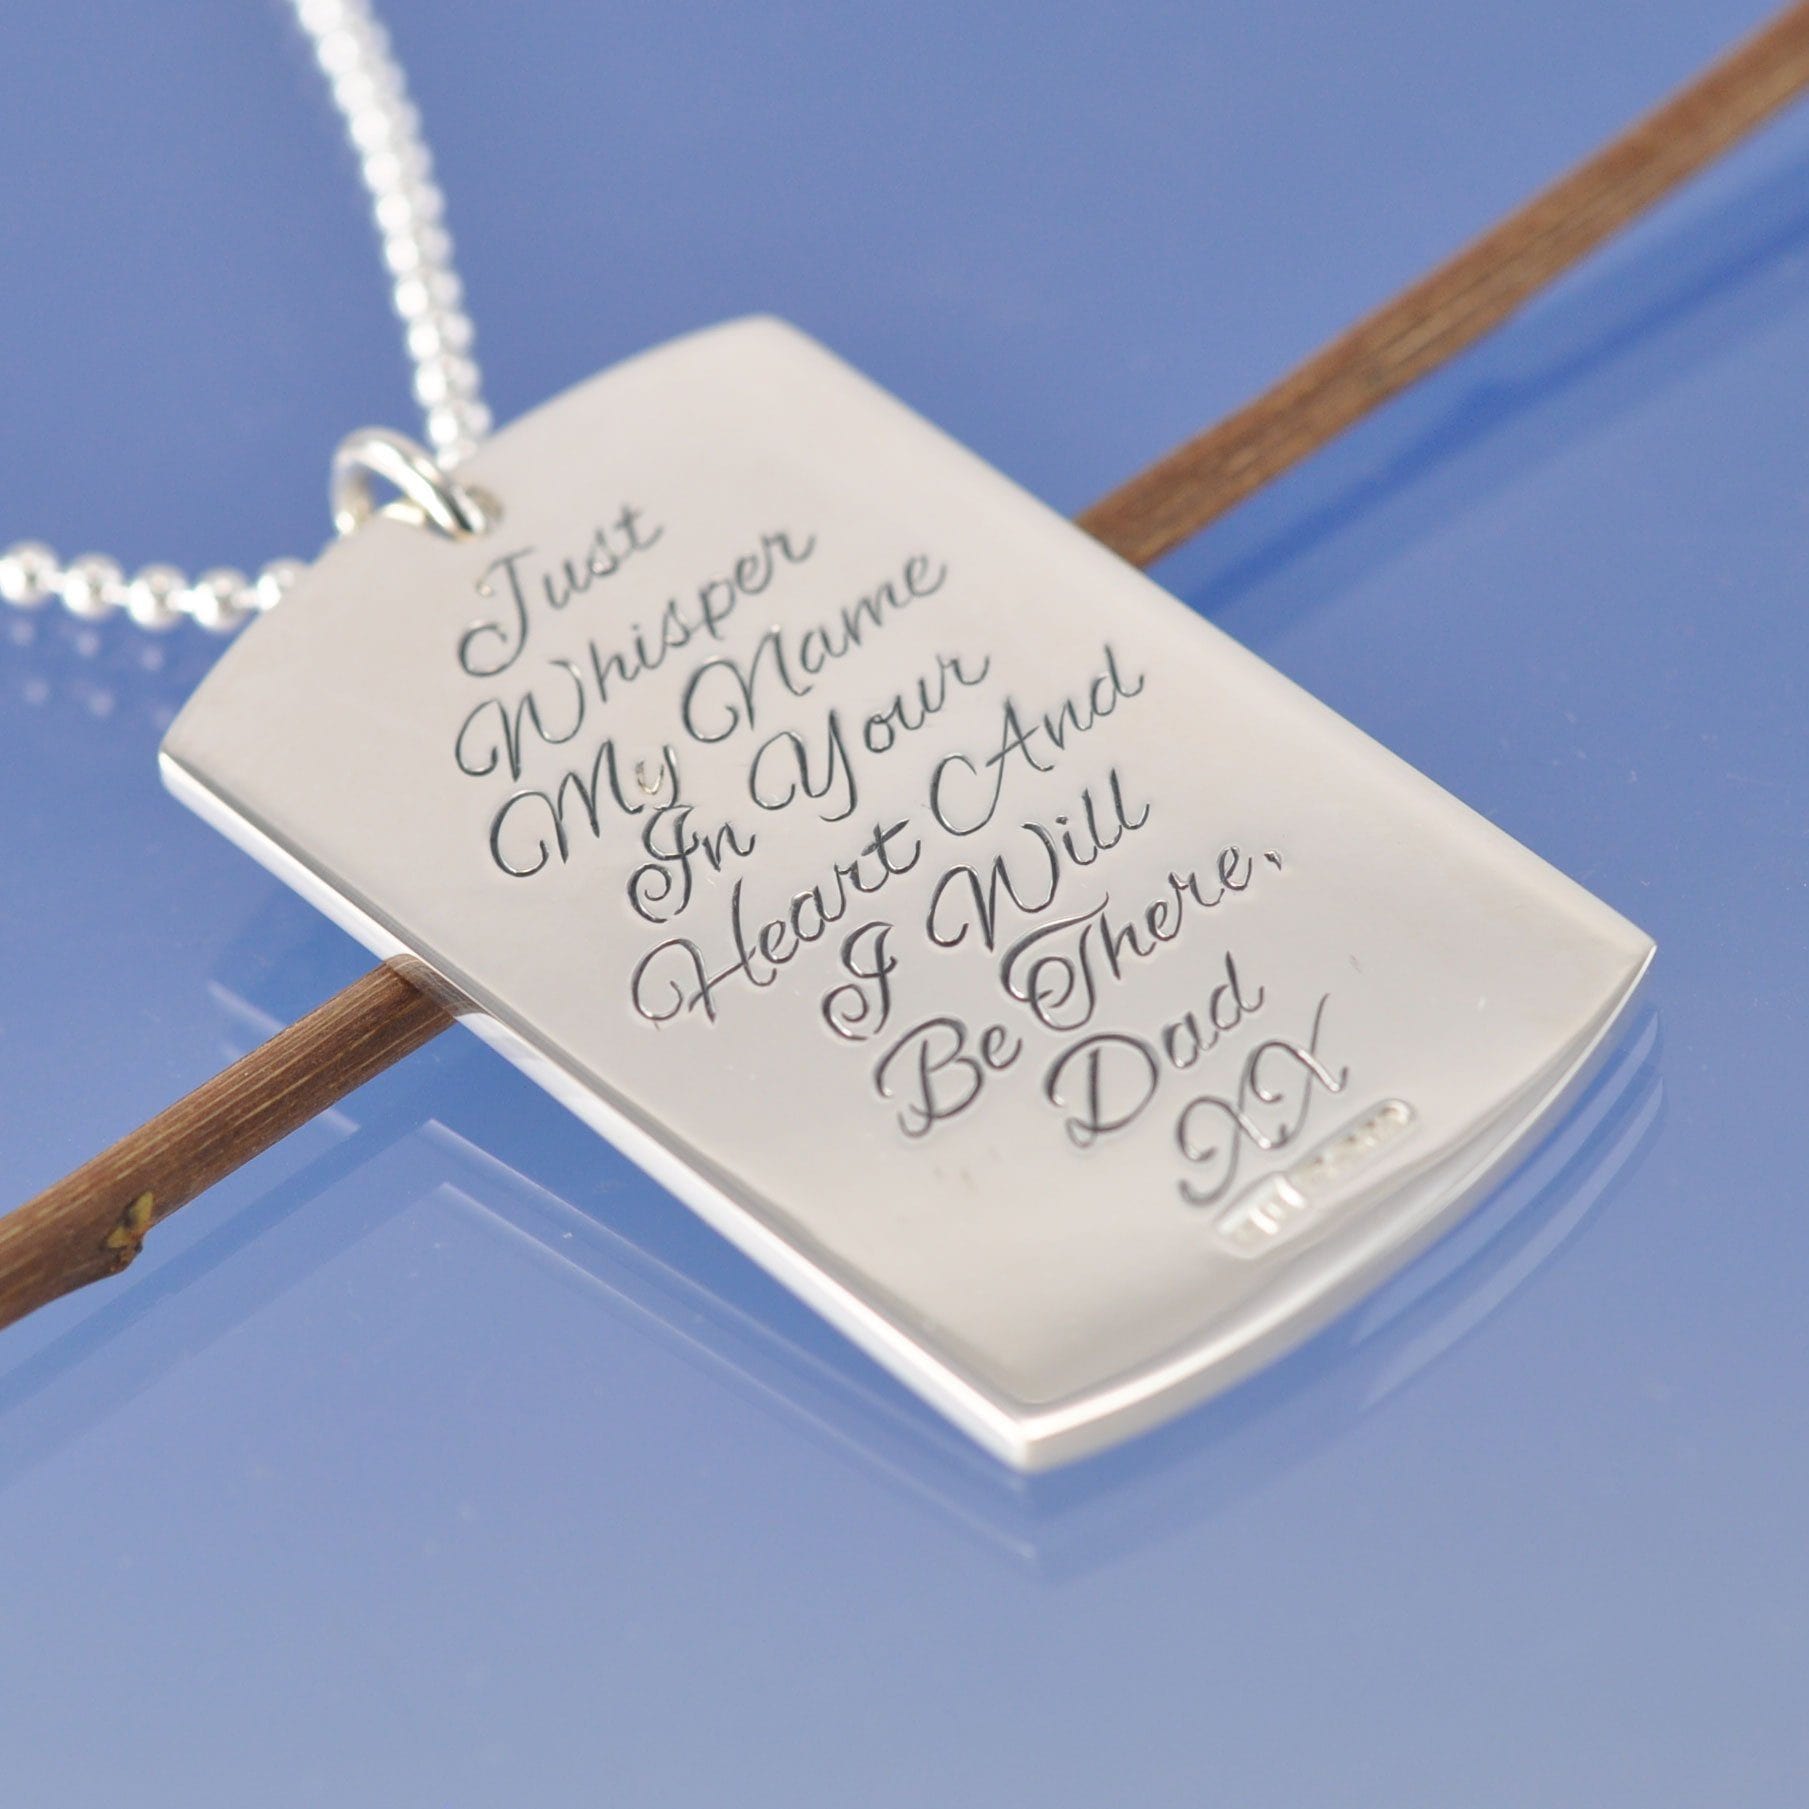 Cremated Ashes Dog Tag Necklace Pendant by Chris Parry Jewellery